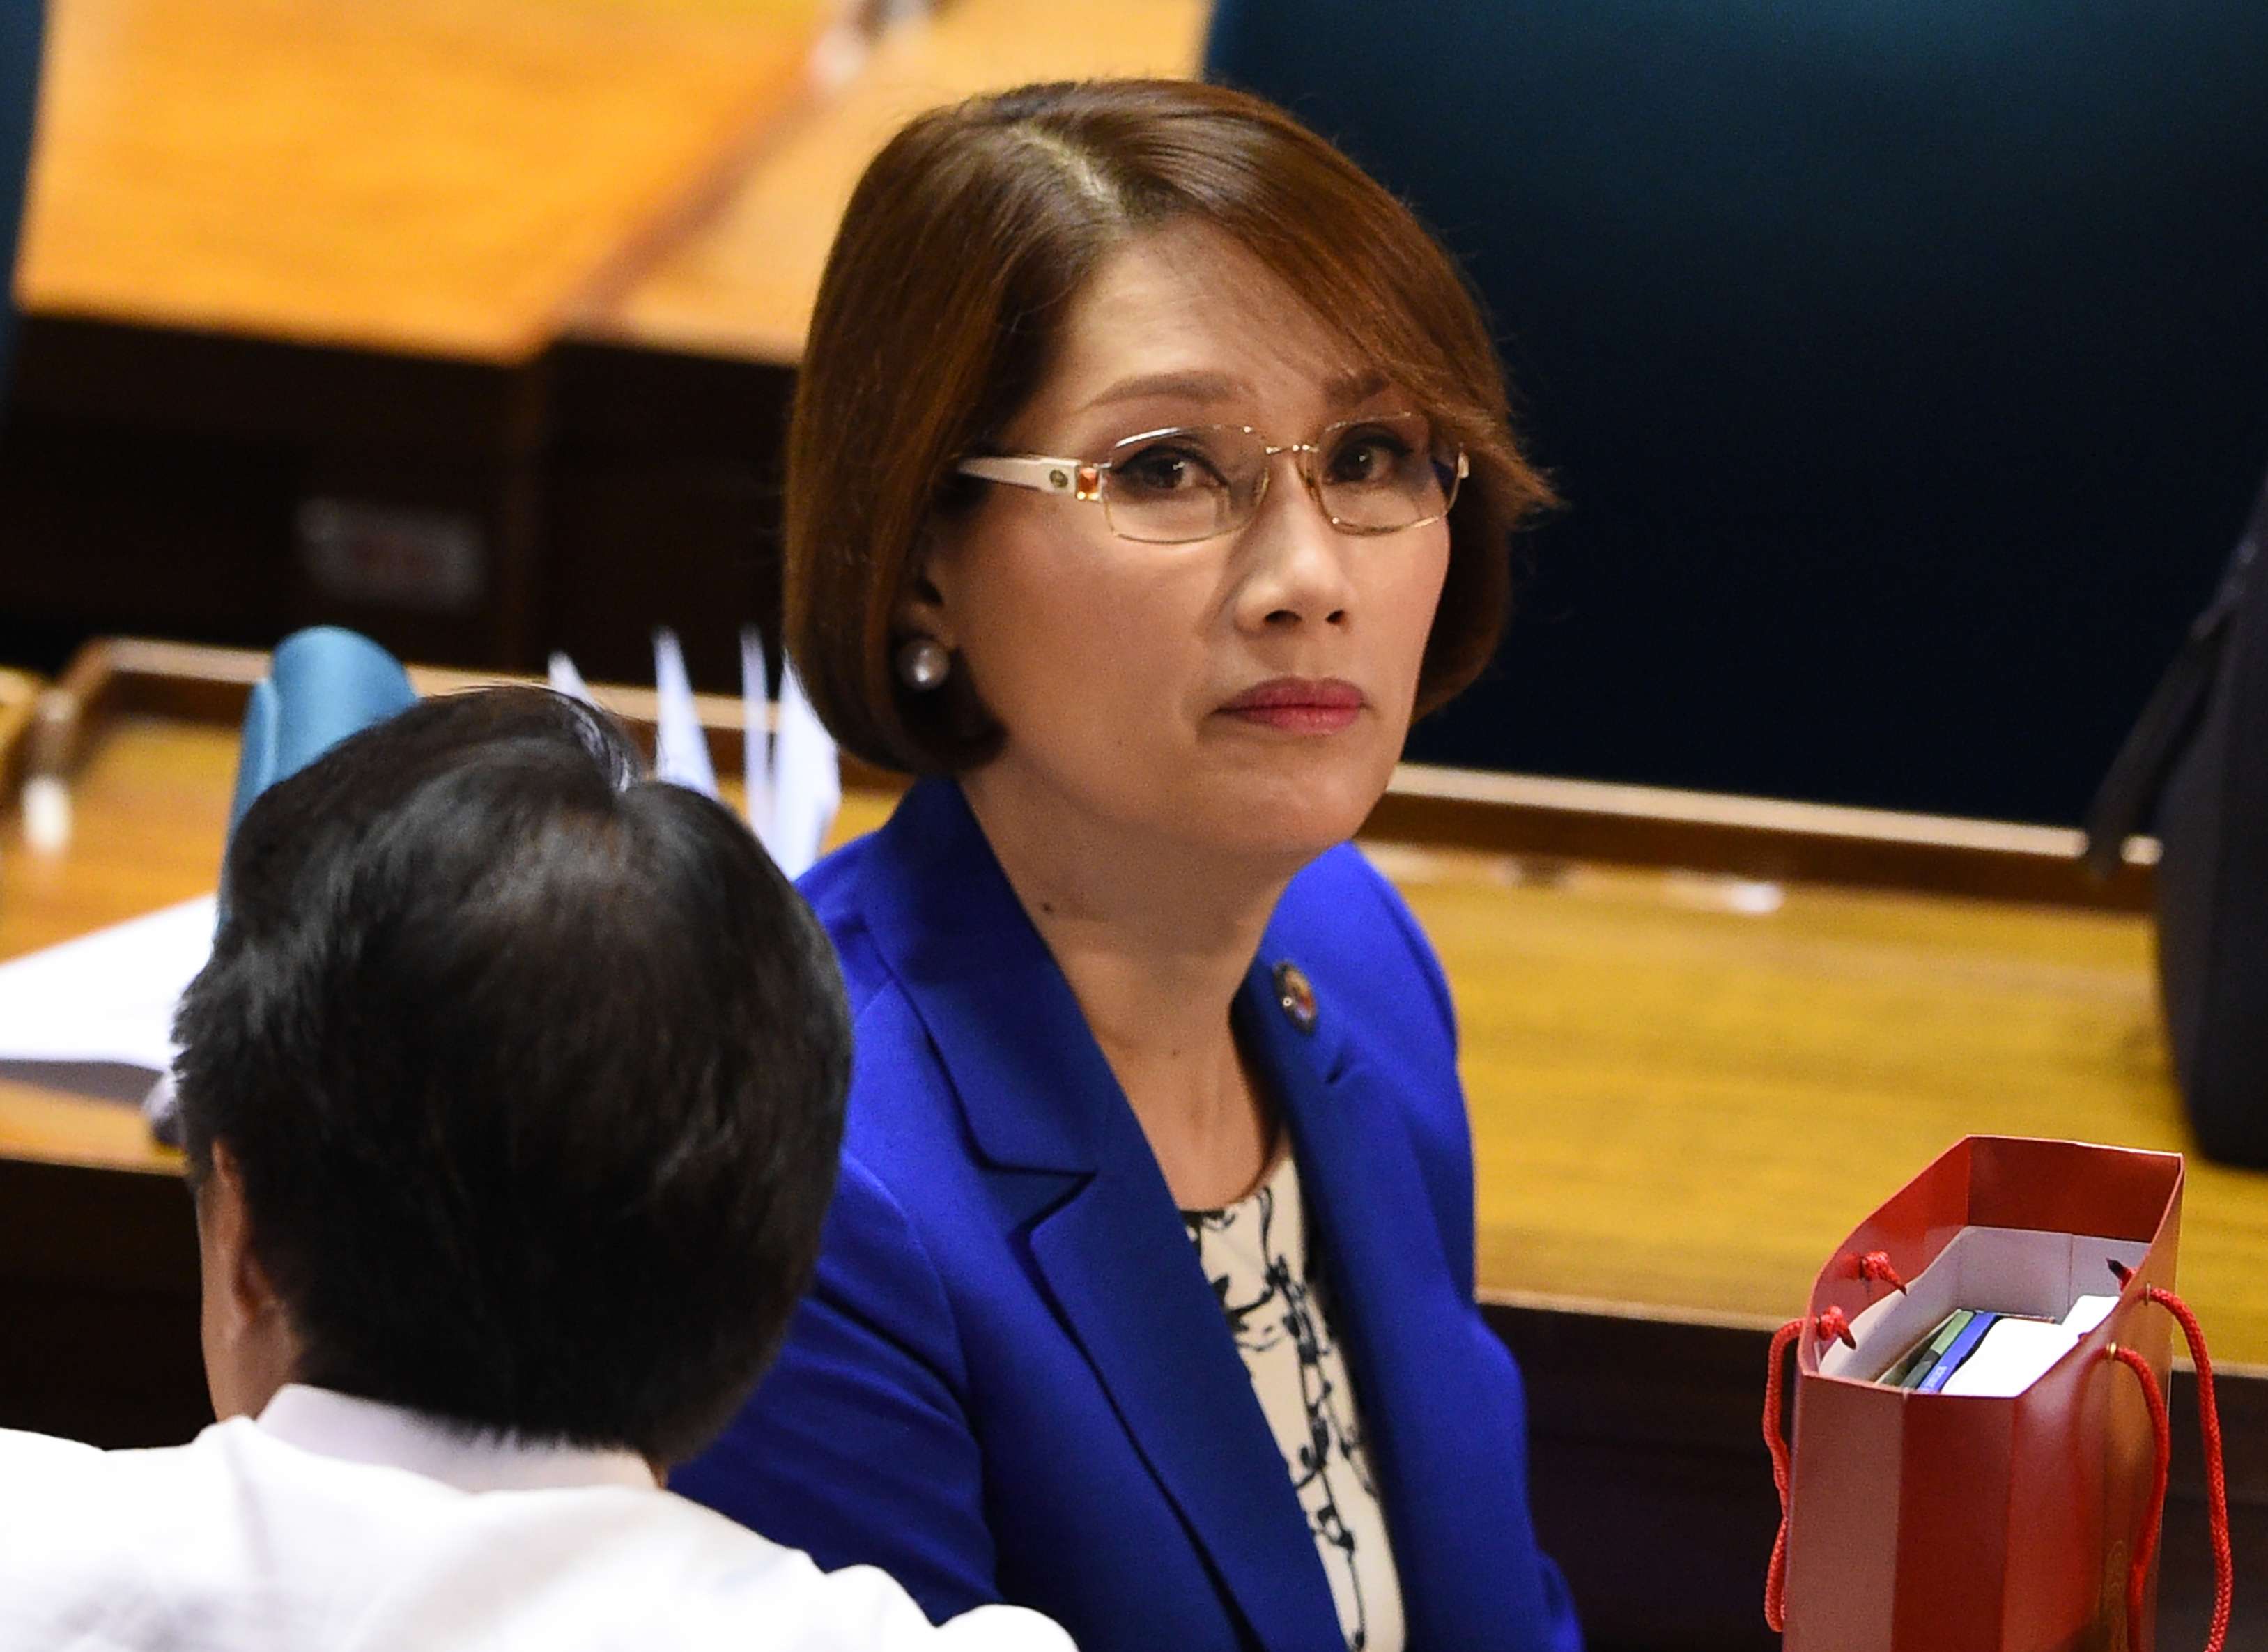 Congresswoman Geraldine Roman’s election was a breakthrough in the devoutly Catholic country – now she hopes Manila will pass a bill to outlaw discrimination against the LGBT community and build on her success